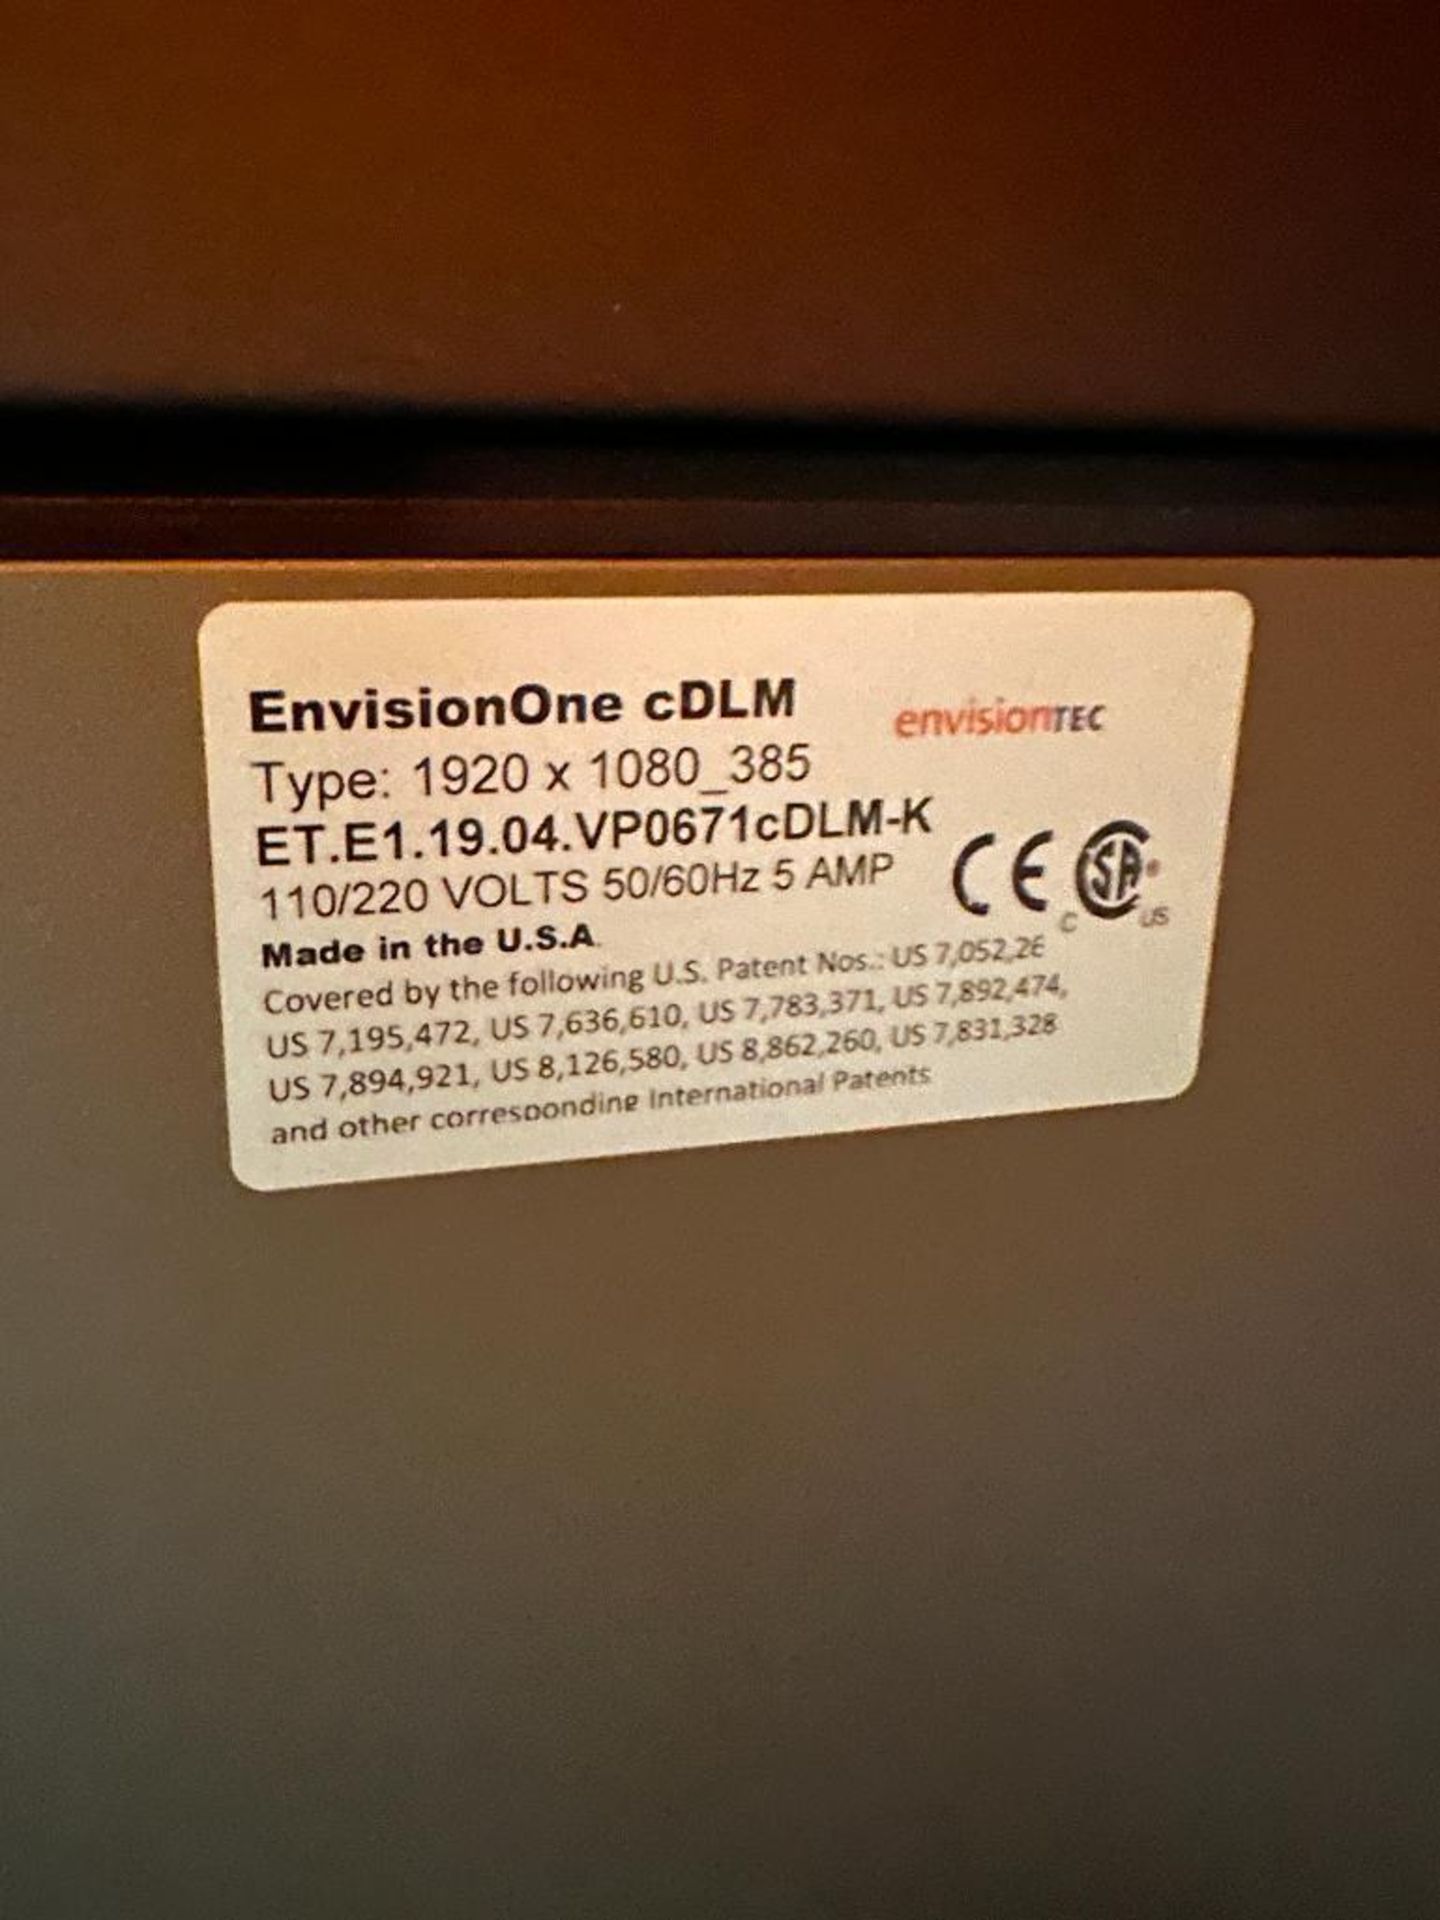 EnvisionOne cDLM Professional Resin 3D Printer w/ Parts Curing & Washing, Oxygen Concentrator, etc. - Image 6 of 19